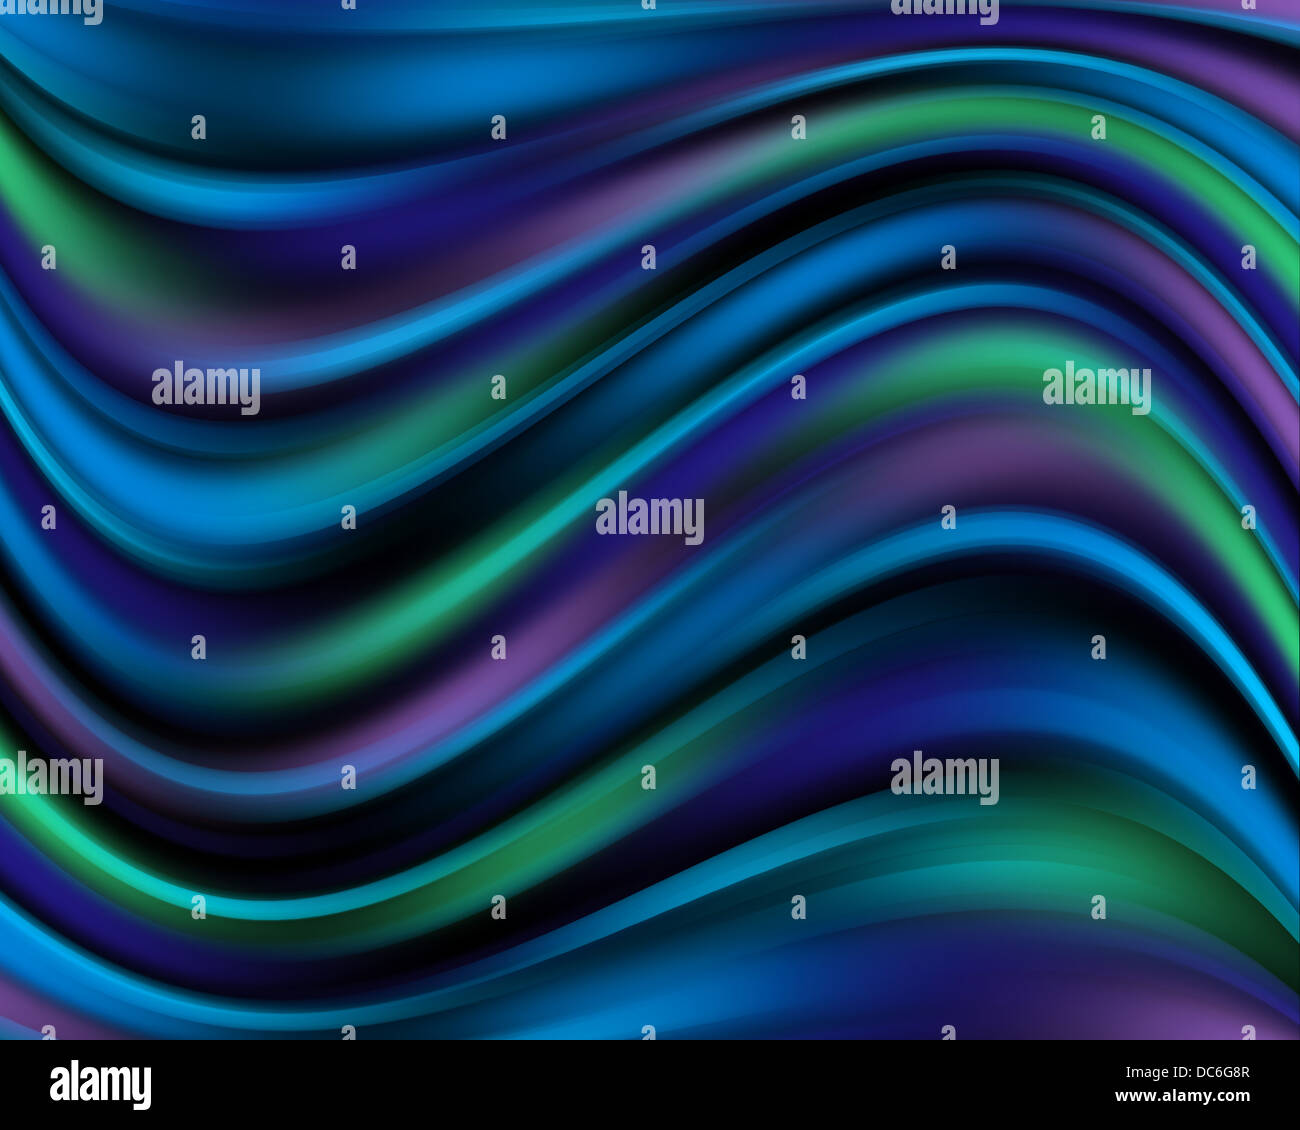 Abstract blue, green and purple wavy lines Stock Photo